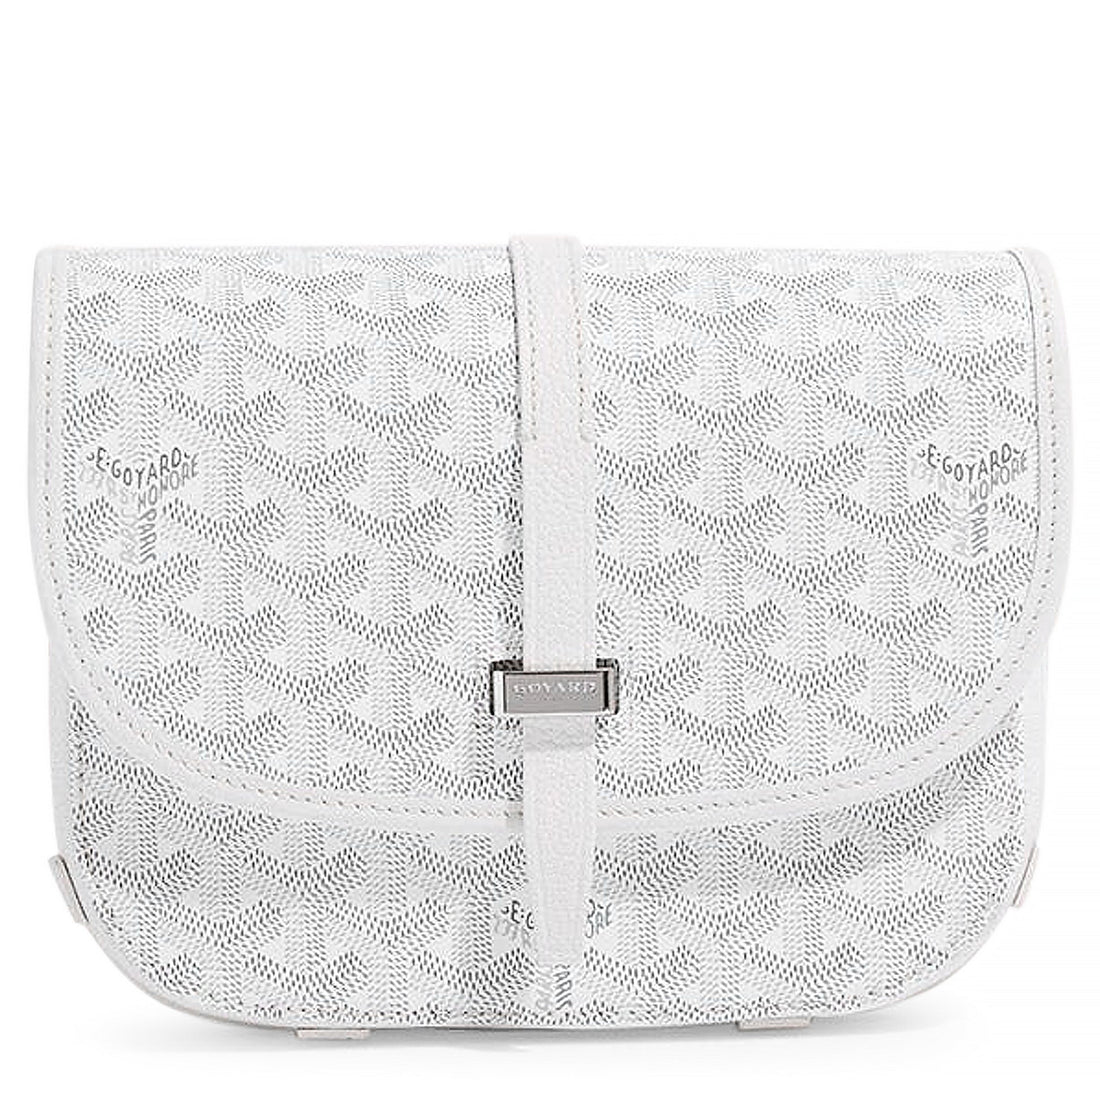 Goyard Belvedere White PM Bag Sourced & Sold Below RRP To One Of